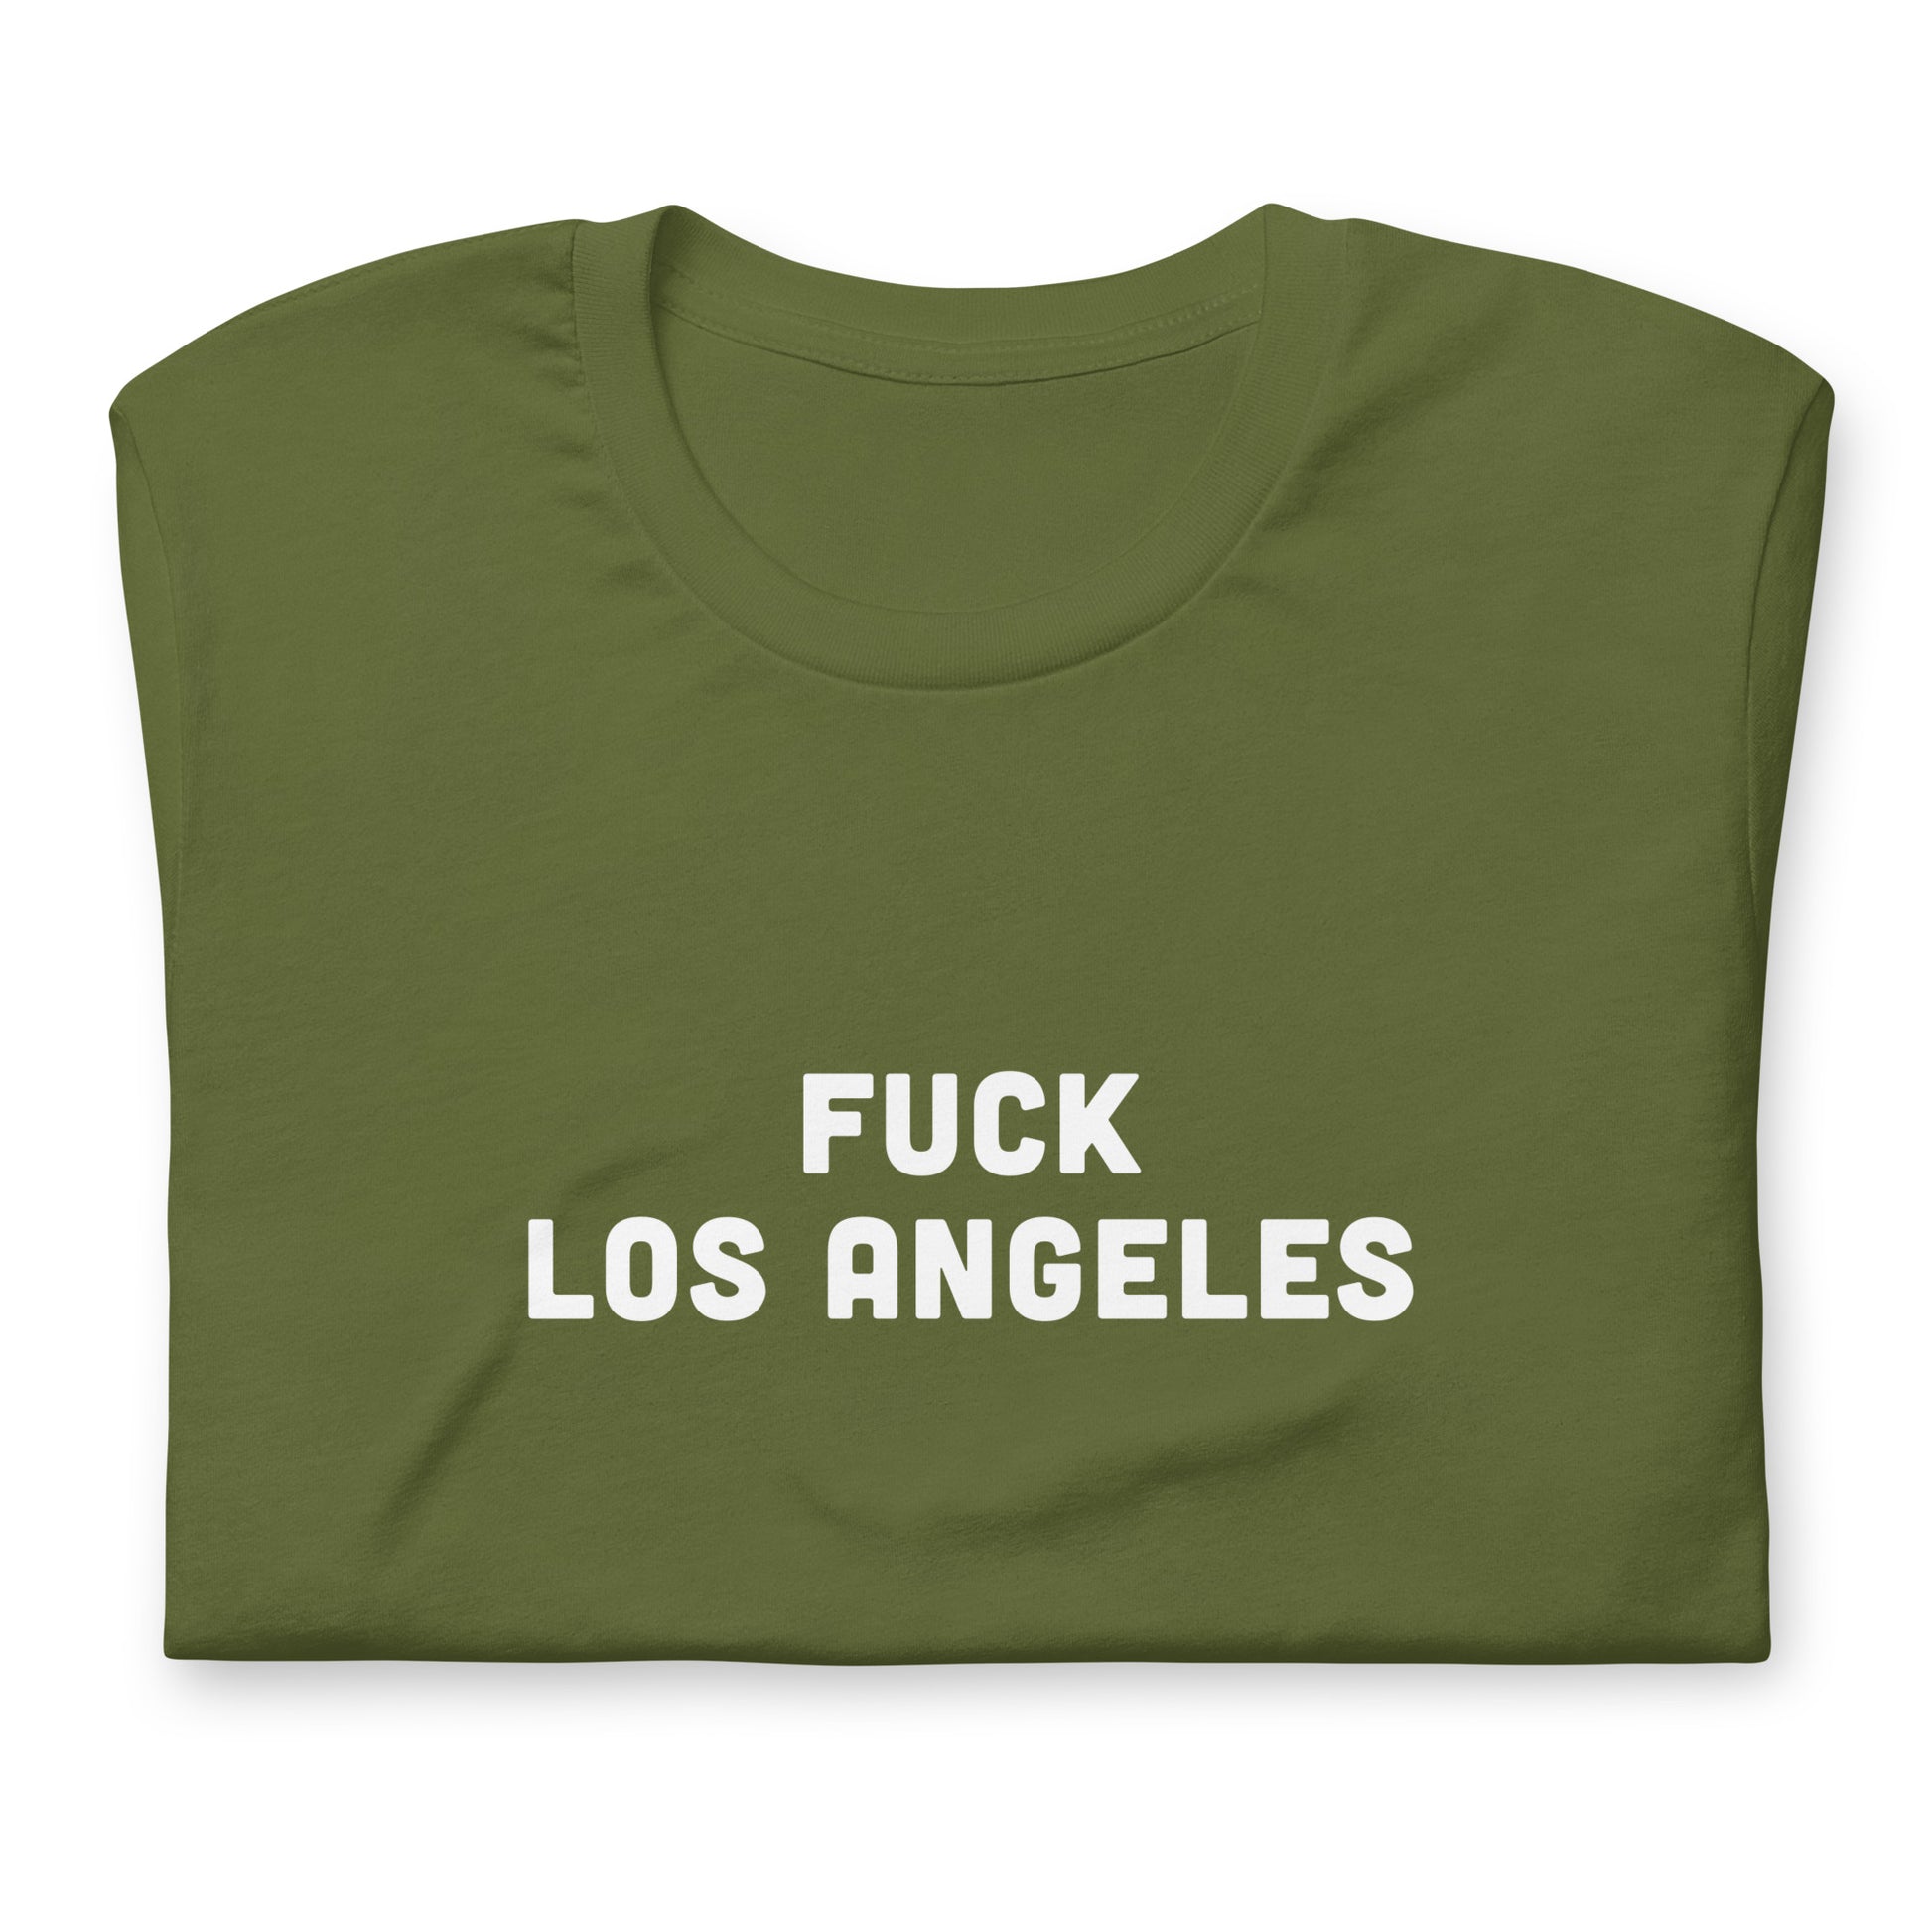 Fuck Los Angeles T-Shirt Size S Color Navy